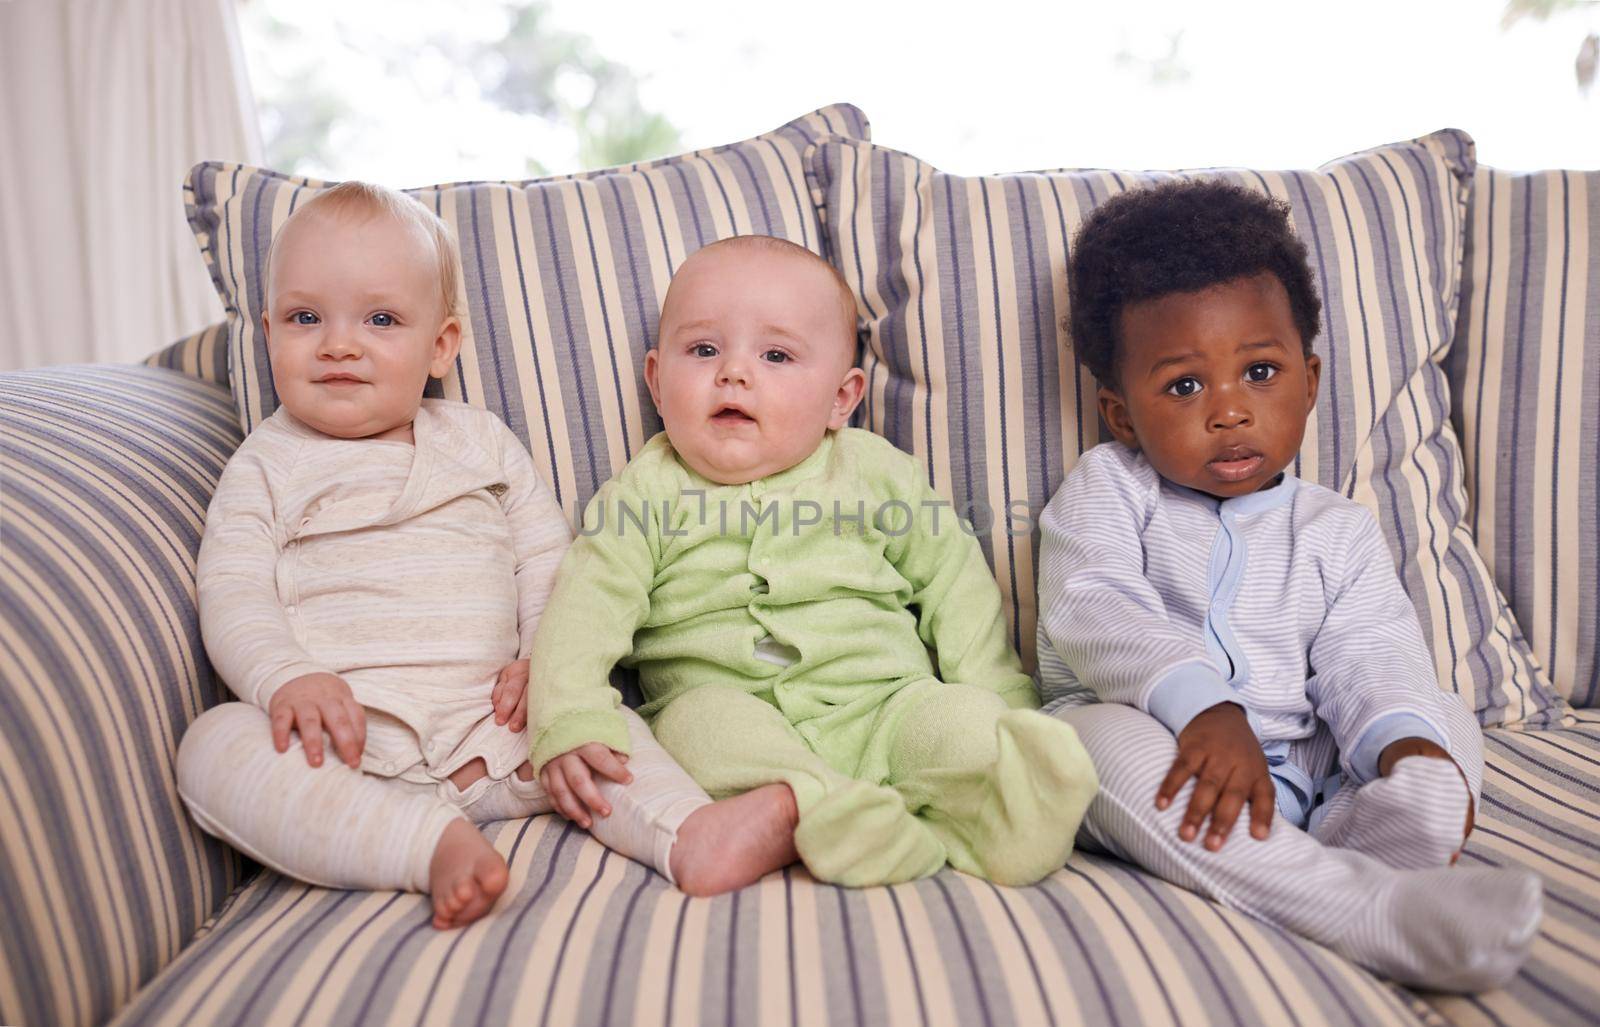 Portrait of three adorable babies sitting on a couch.